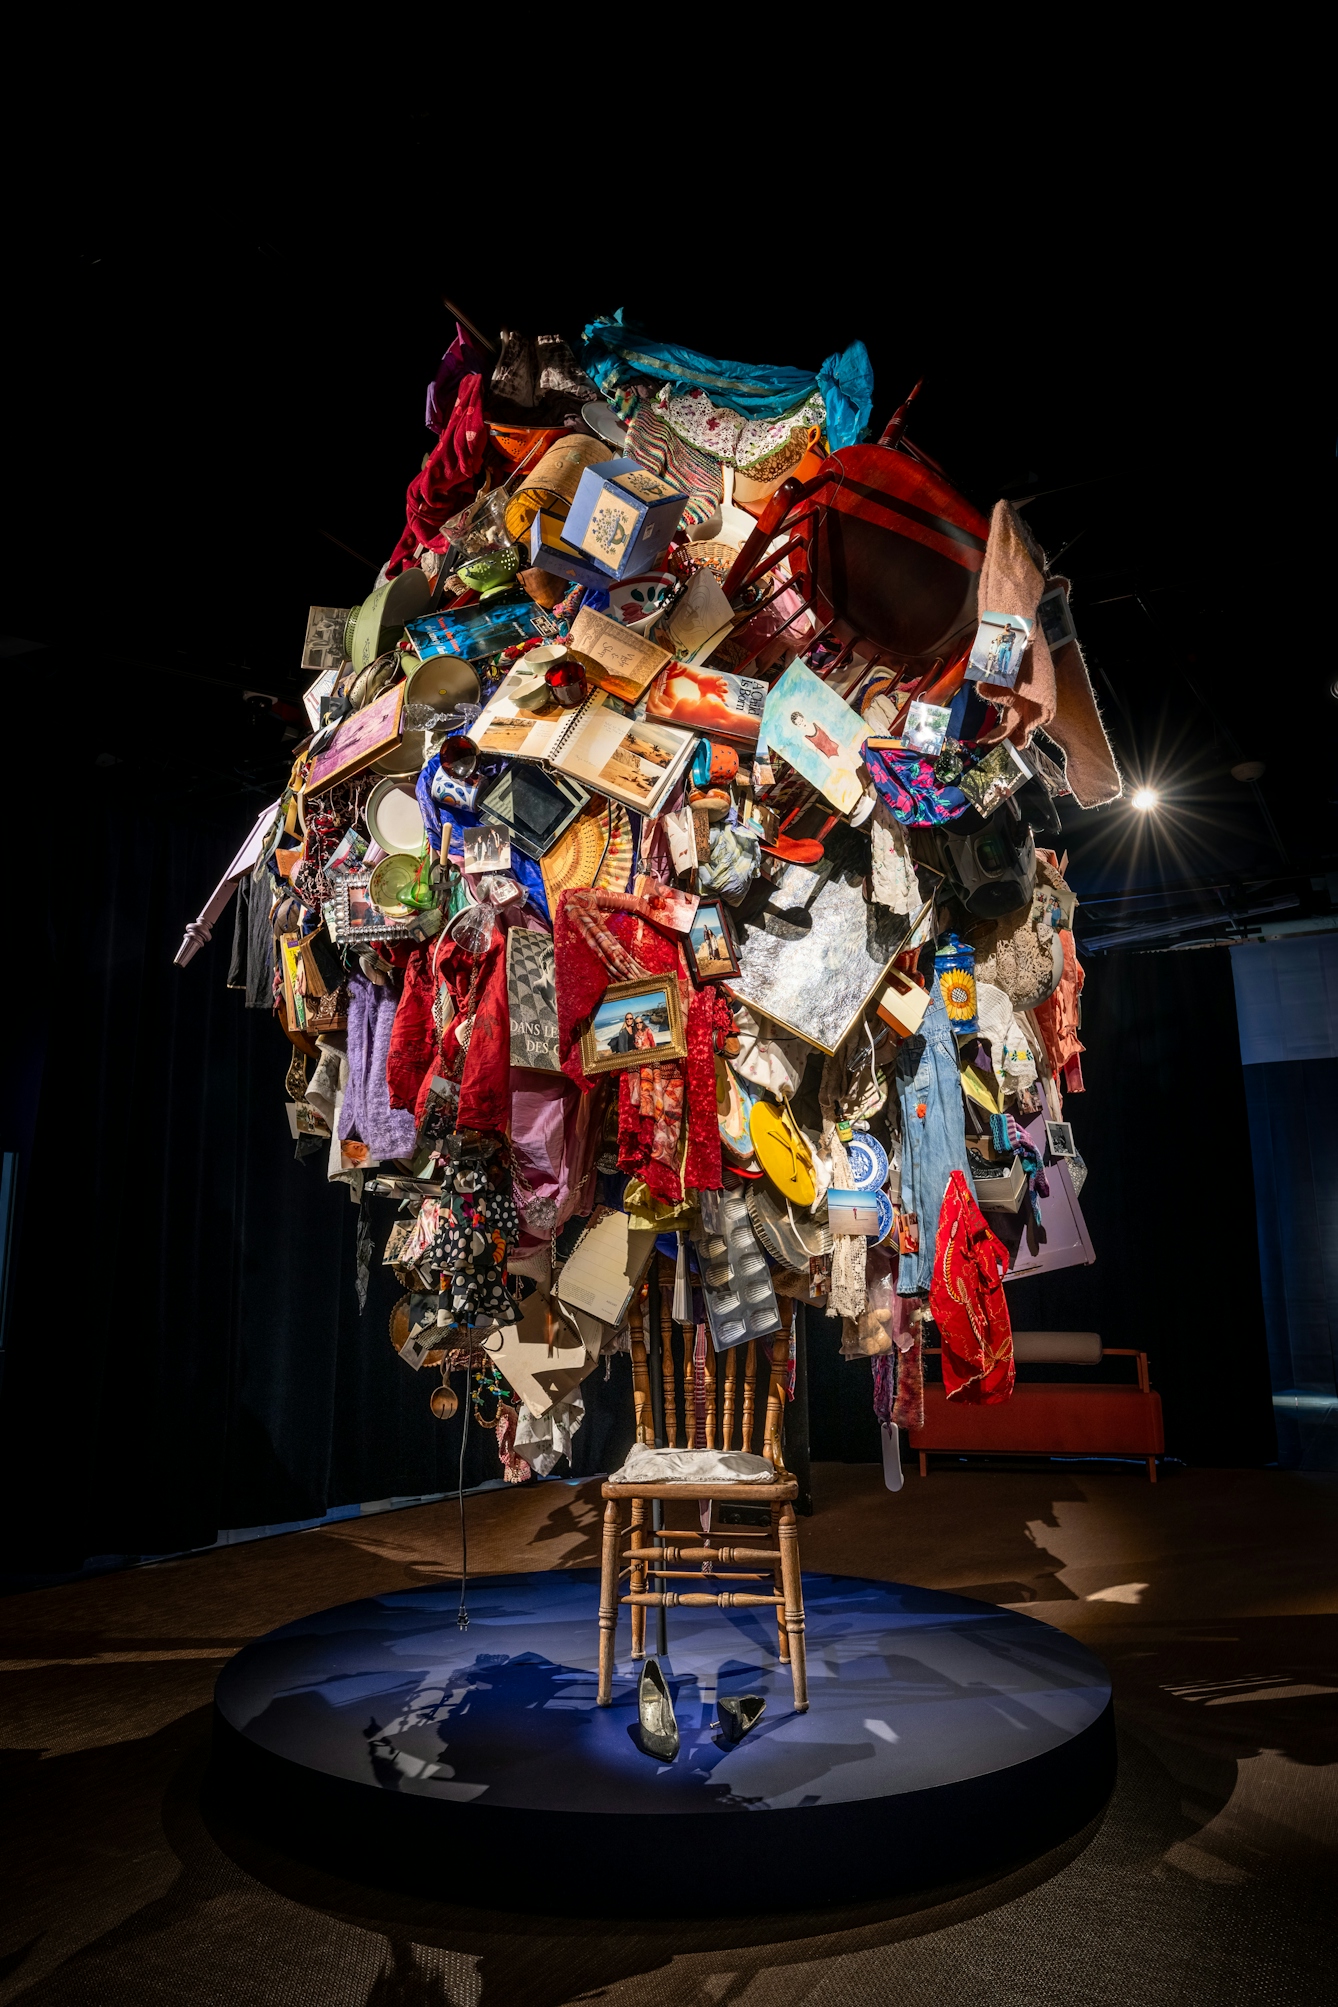 Photograph of an exhibition installation showing a solitary chair placed in the centre of a blue circular plinth. Under the chair are a pair of silver stilettos. Above the chair, a multitude of objects seem to be falling out down from the dark ceiling. These objects include clothes, photo albums and furniture.